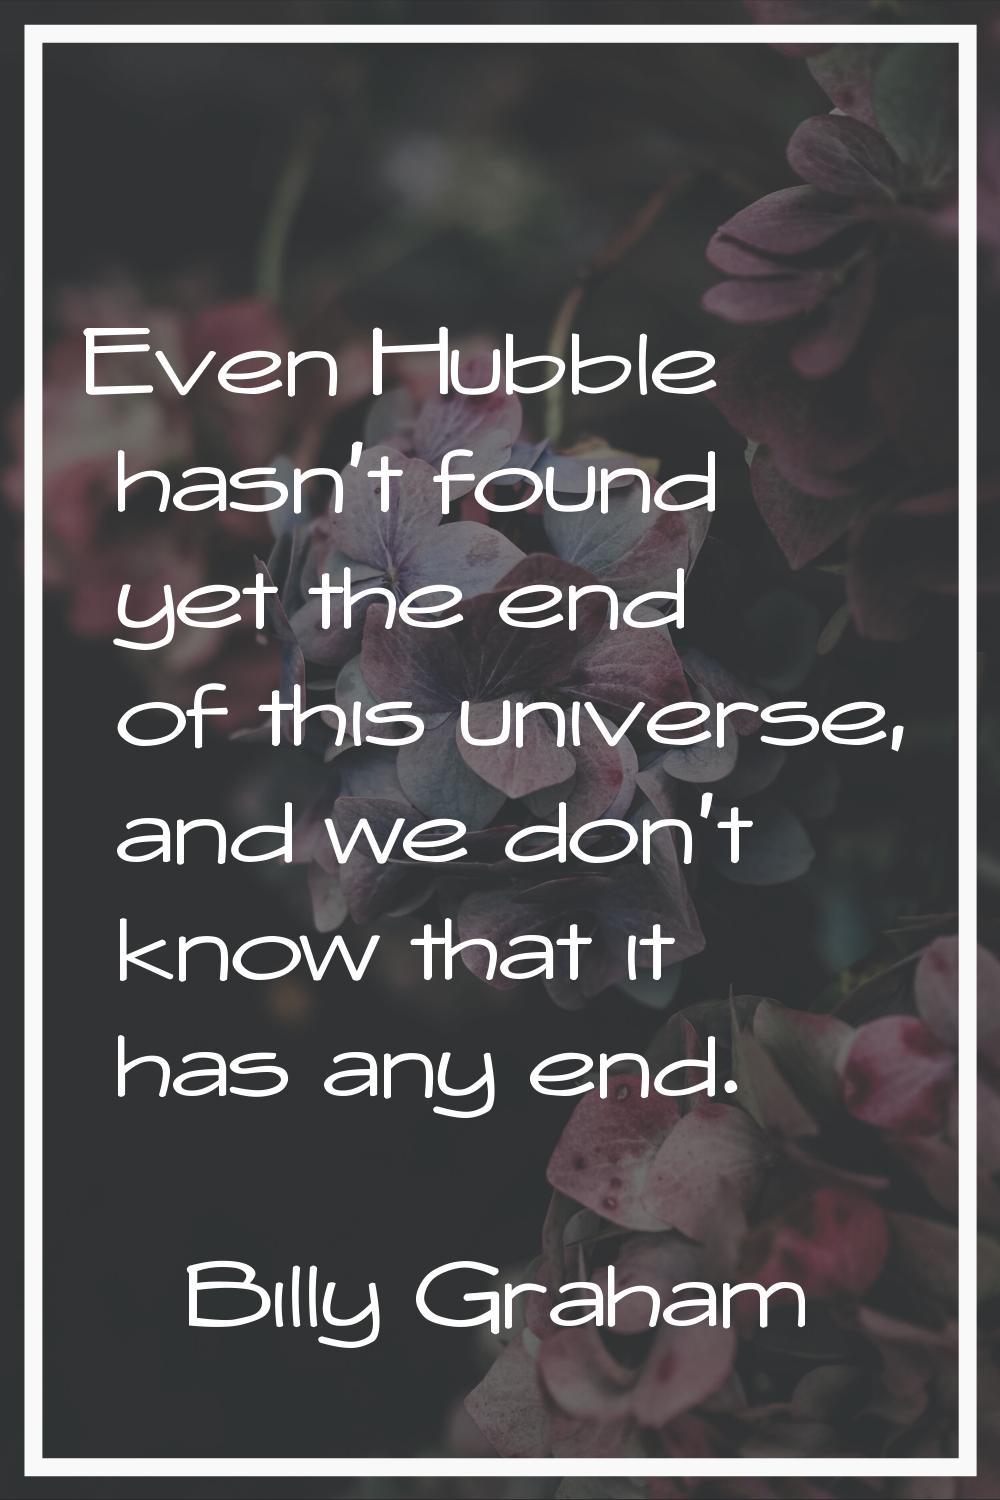 Even Hubble hasn't found yet the end of this universe, and we don't know that it has any end.